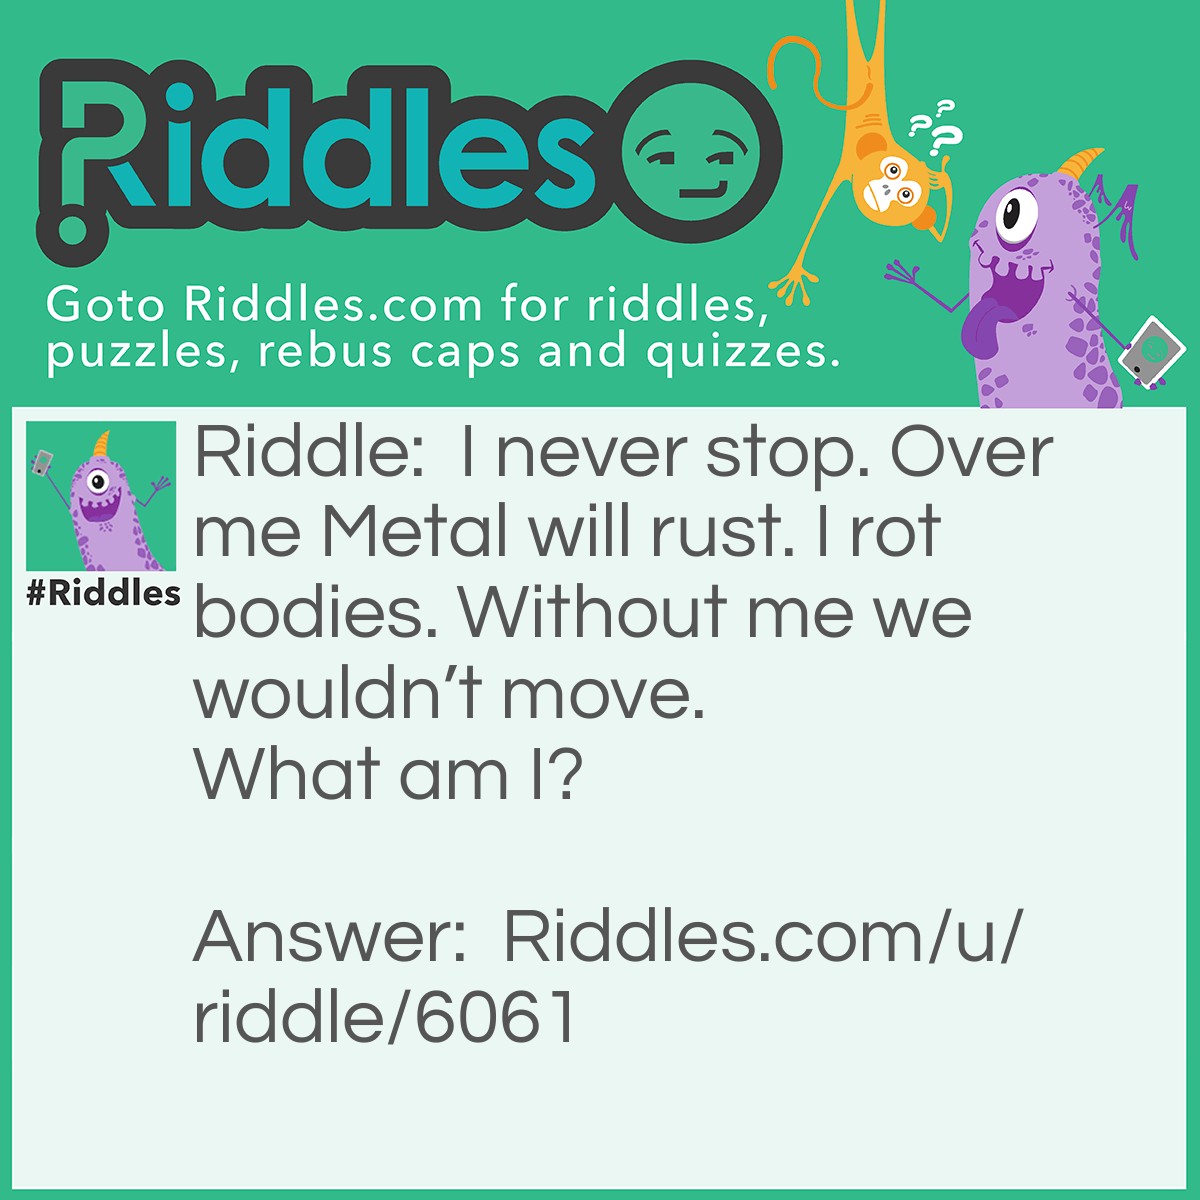 Riddle: I never stop. Over me Metal will rust. I rot bodies. Without me we wouldn't move. What am I? Answer: Time because over time metal will rust. And in some time bodies will rot and if we had no time we wouldn’t be able to move.